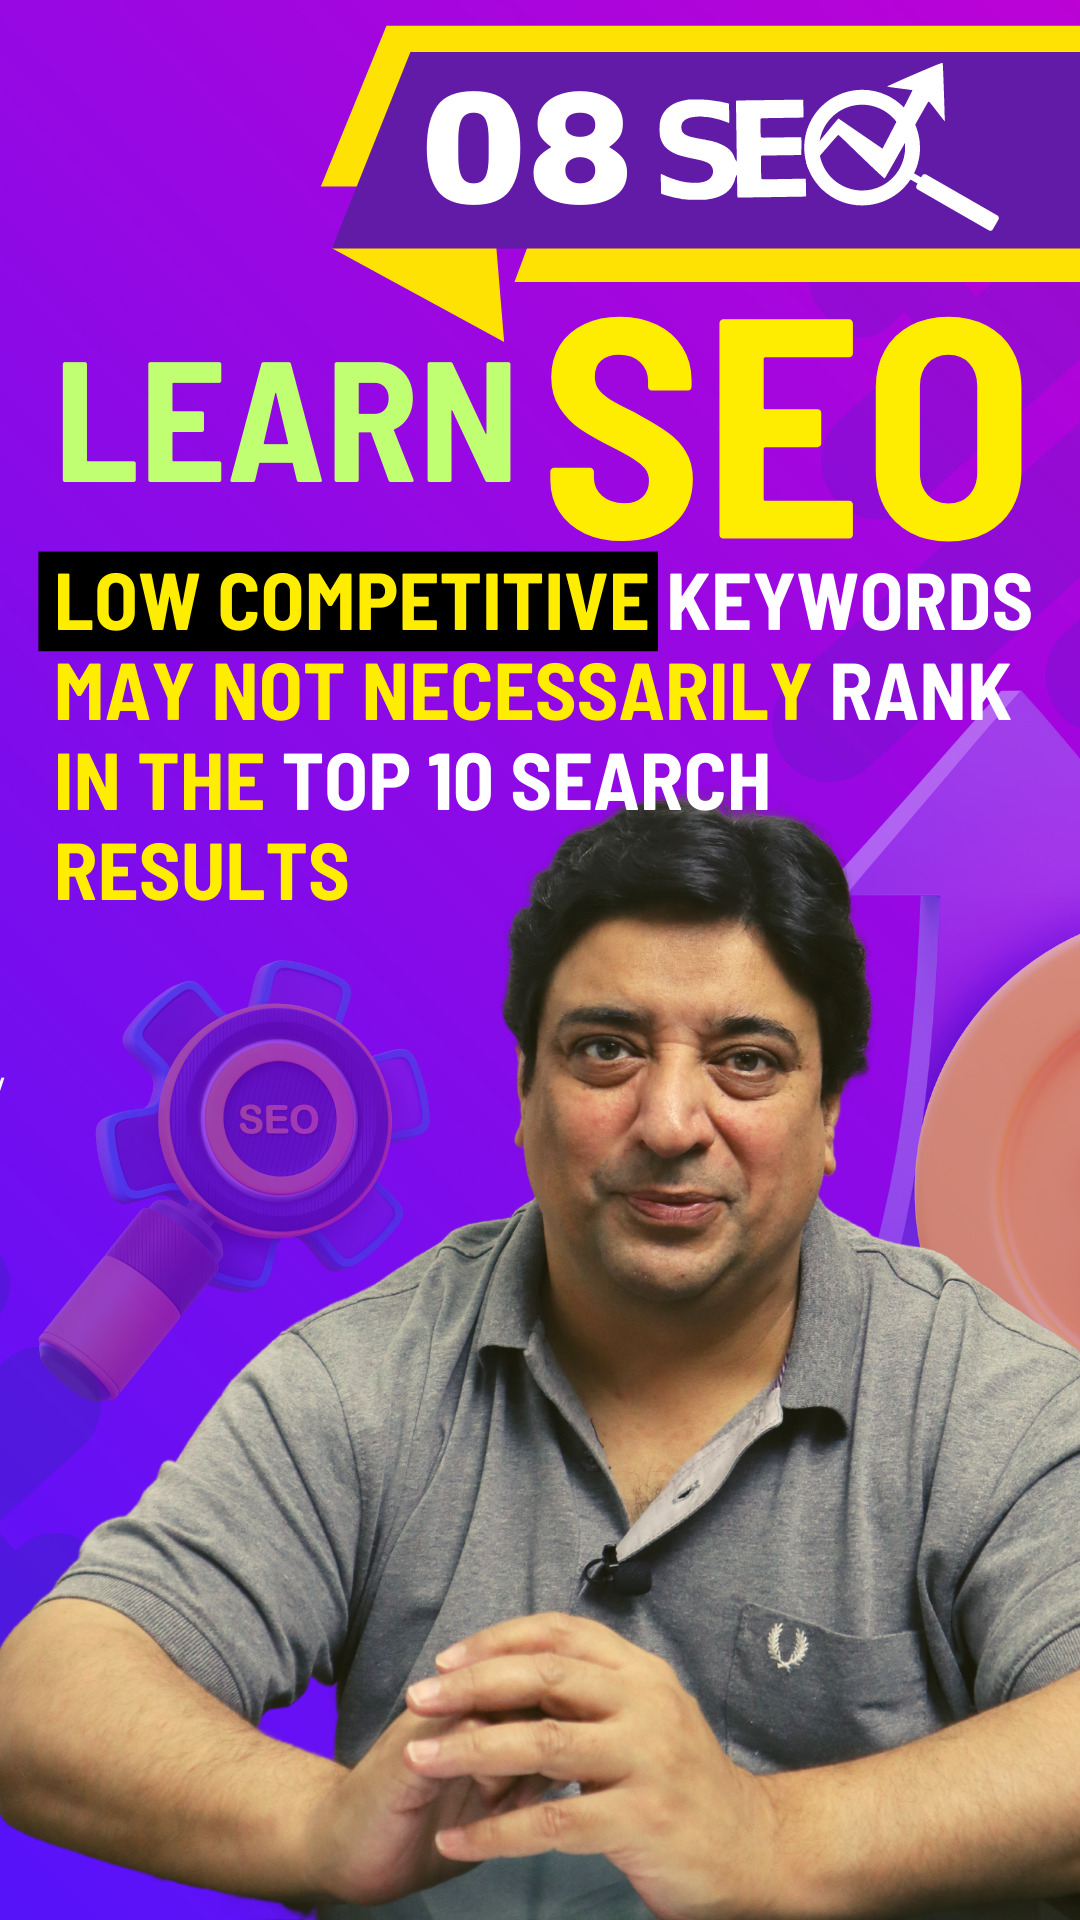 Low competitive keywords may not necessarily rank in the Top 10 search results